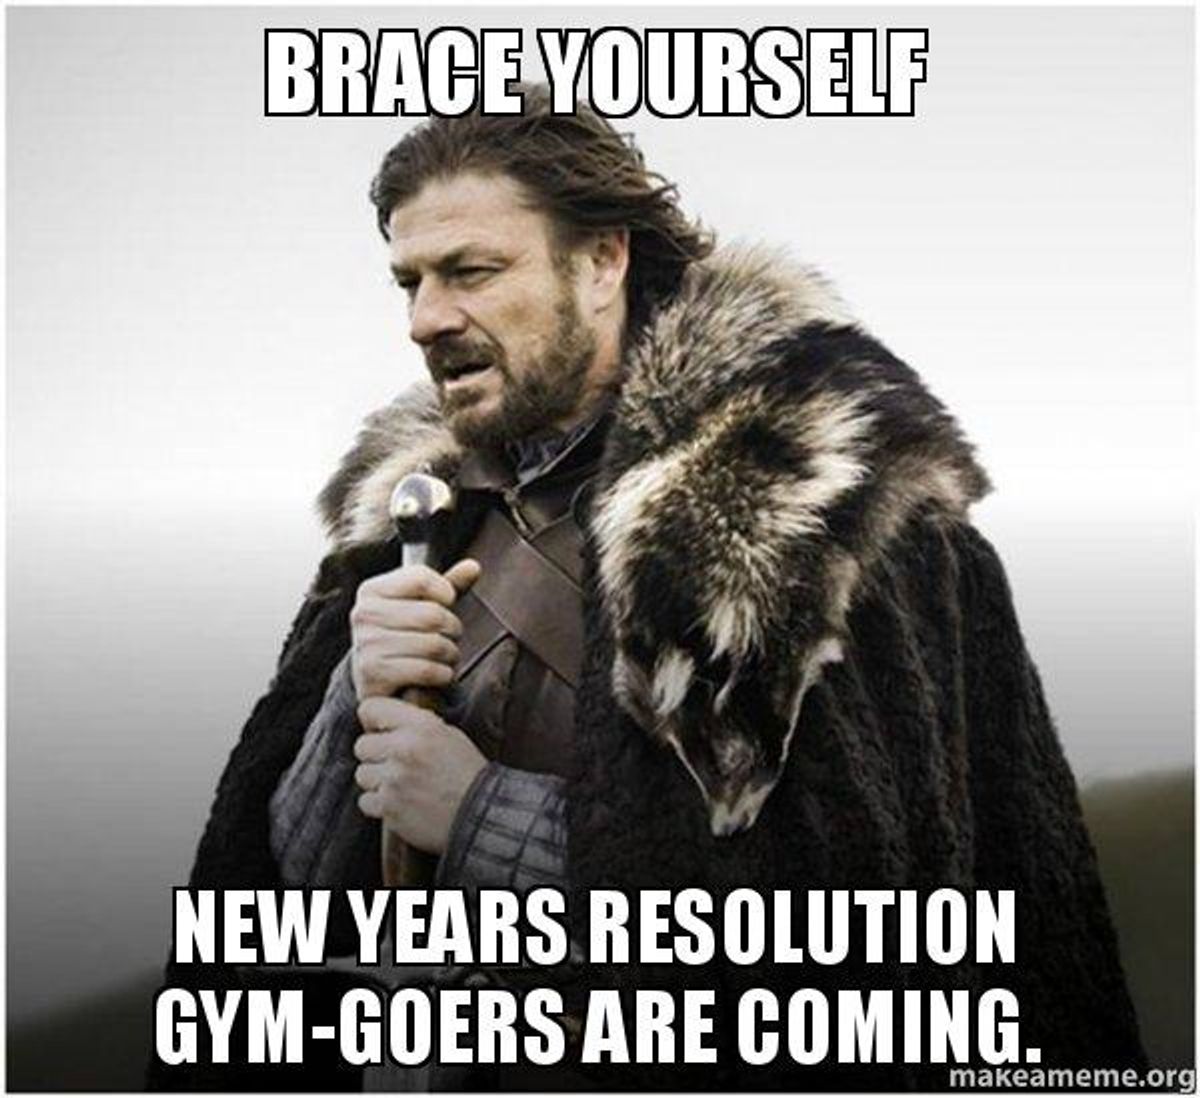 Guide To Handling New Year's Resolution-ers In The Gym